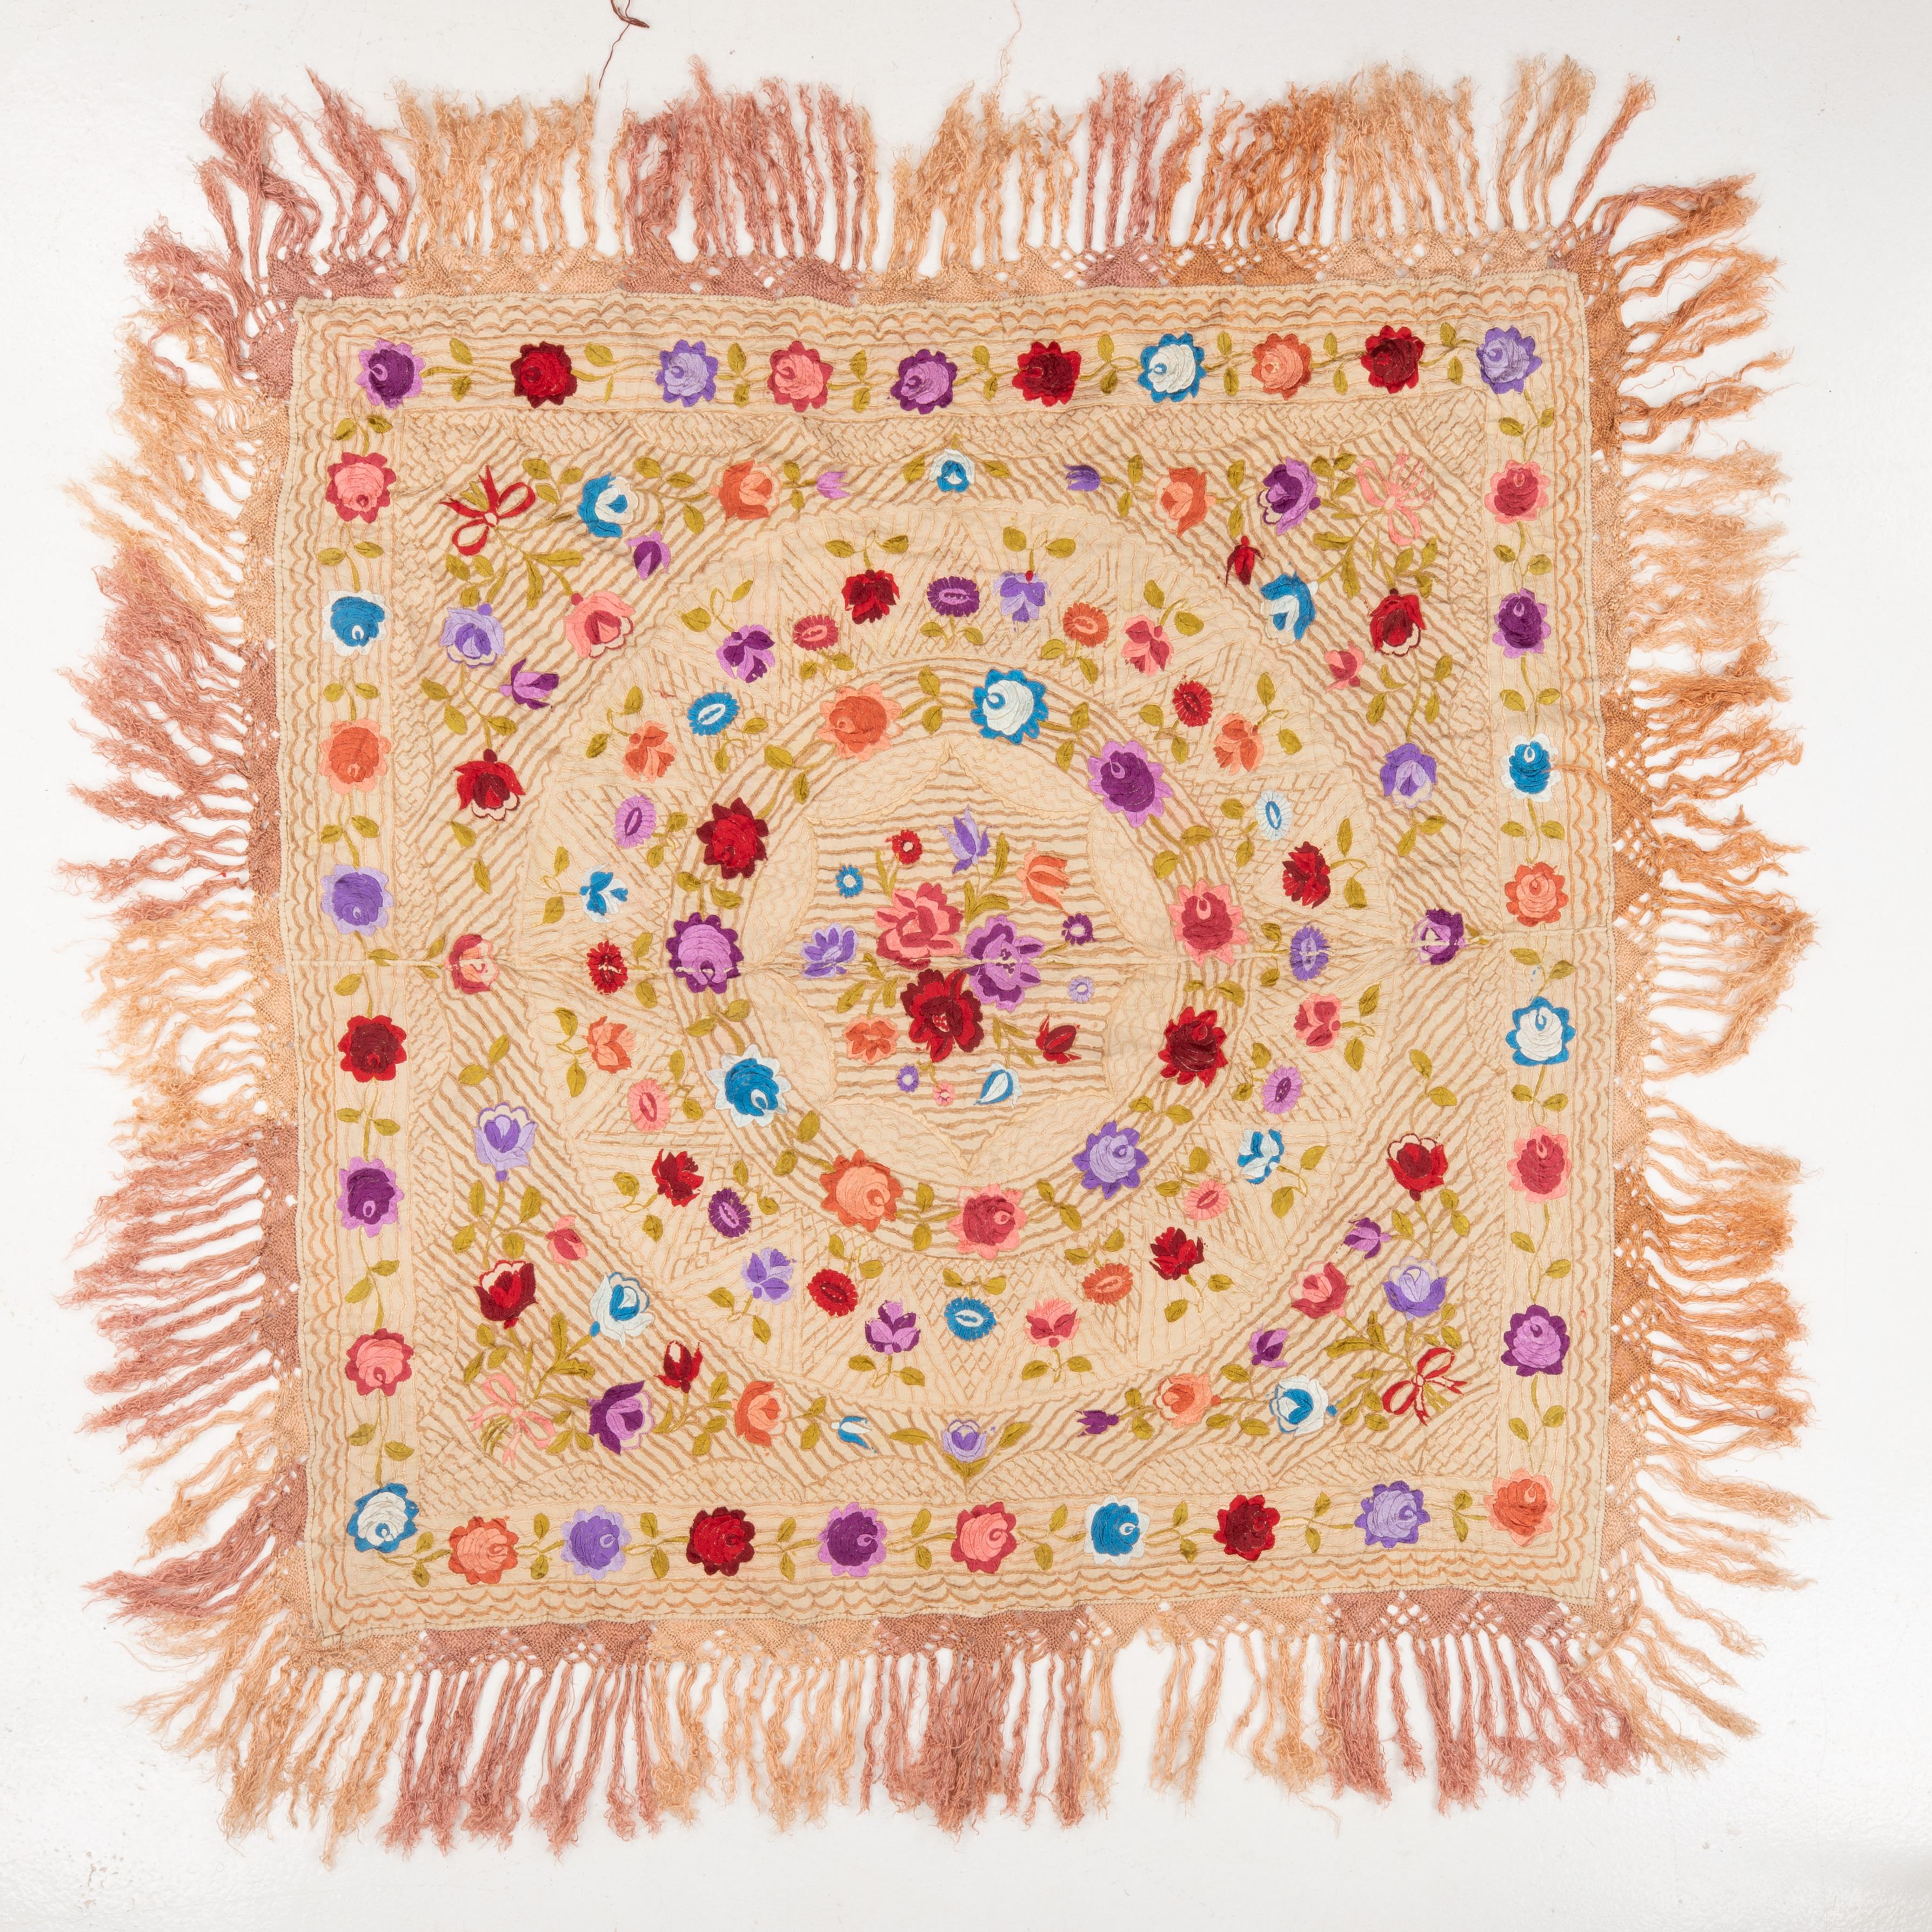 Embroidered Hungarian Matyo Embroidery, Early 20th C. For Sale